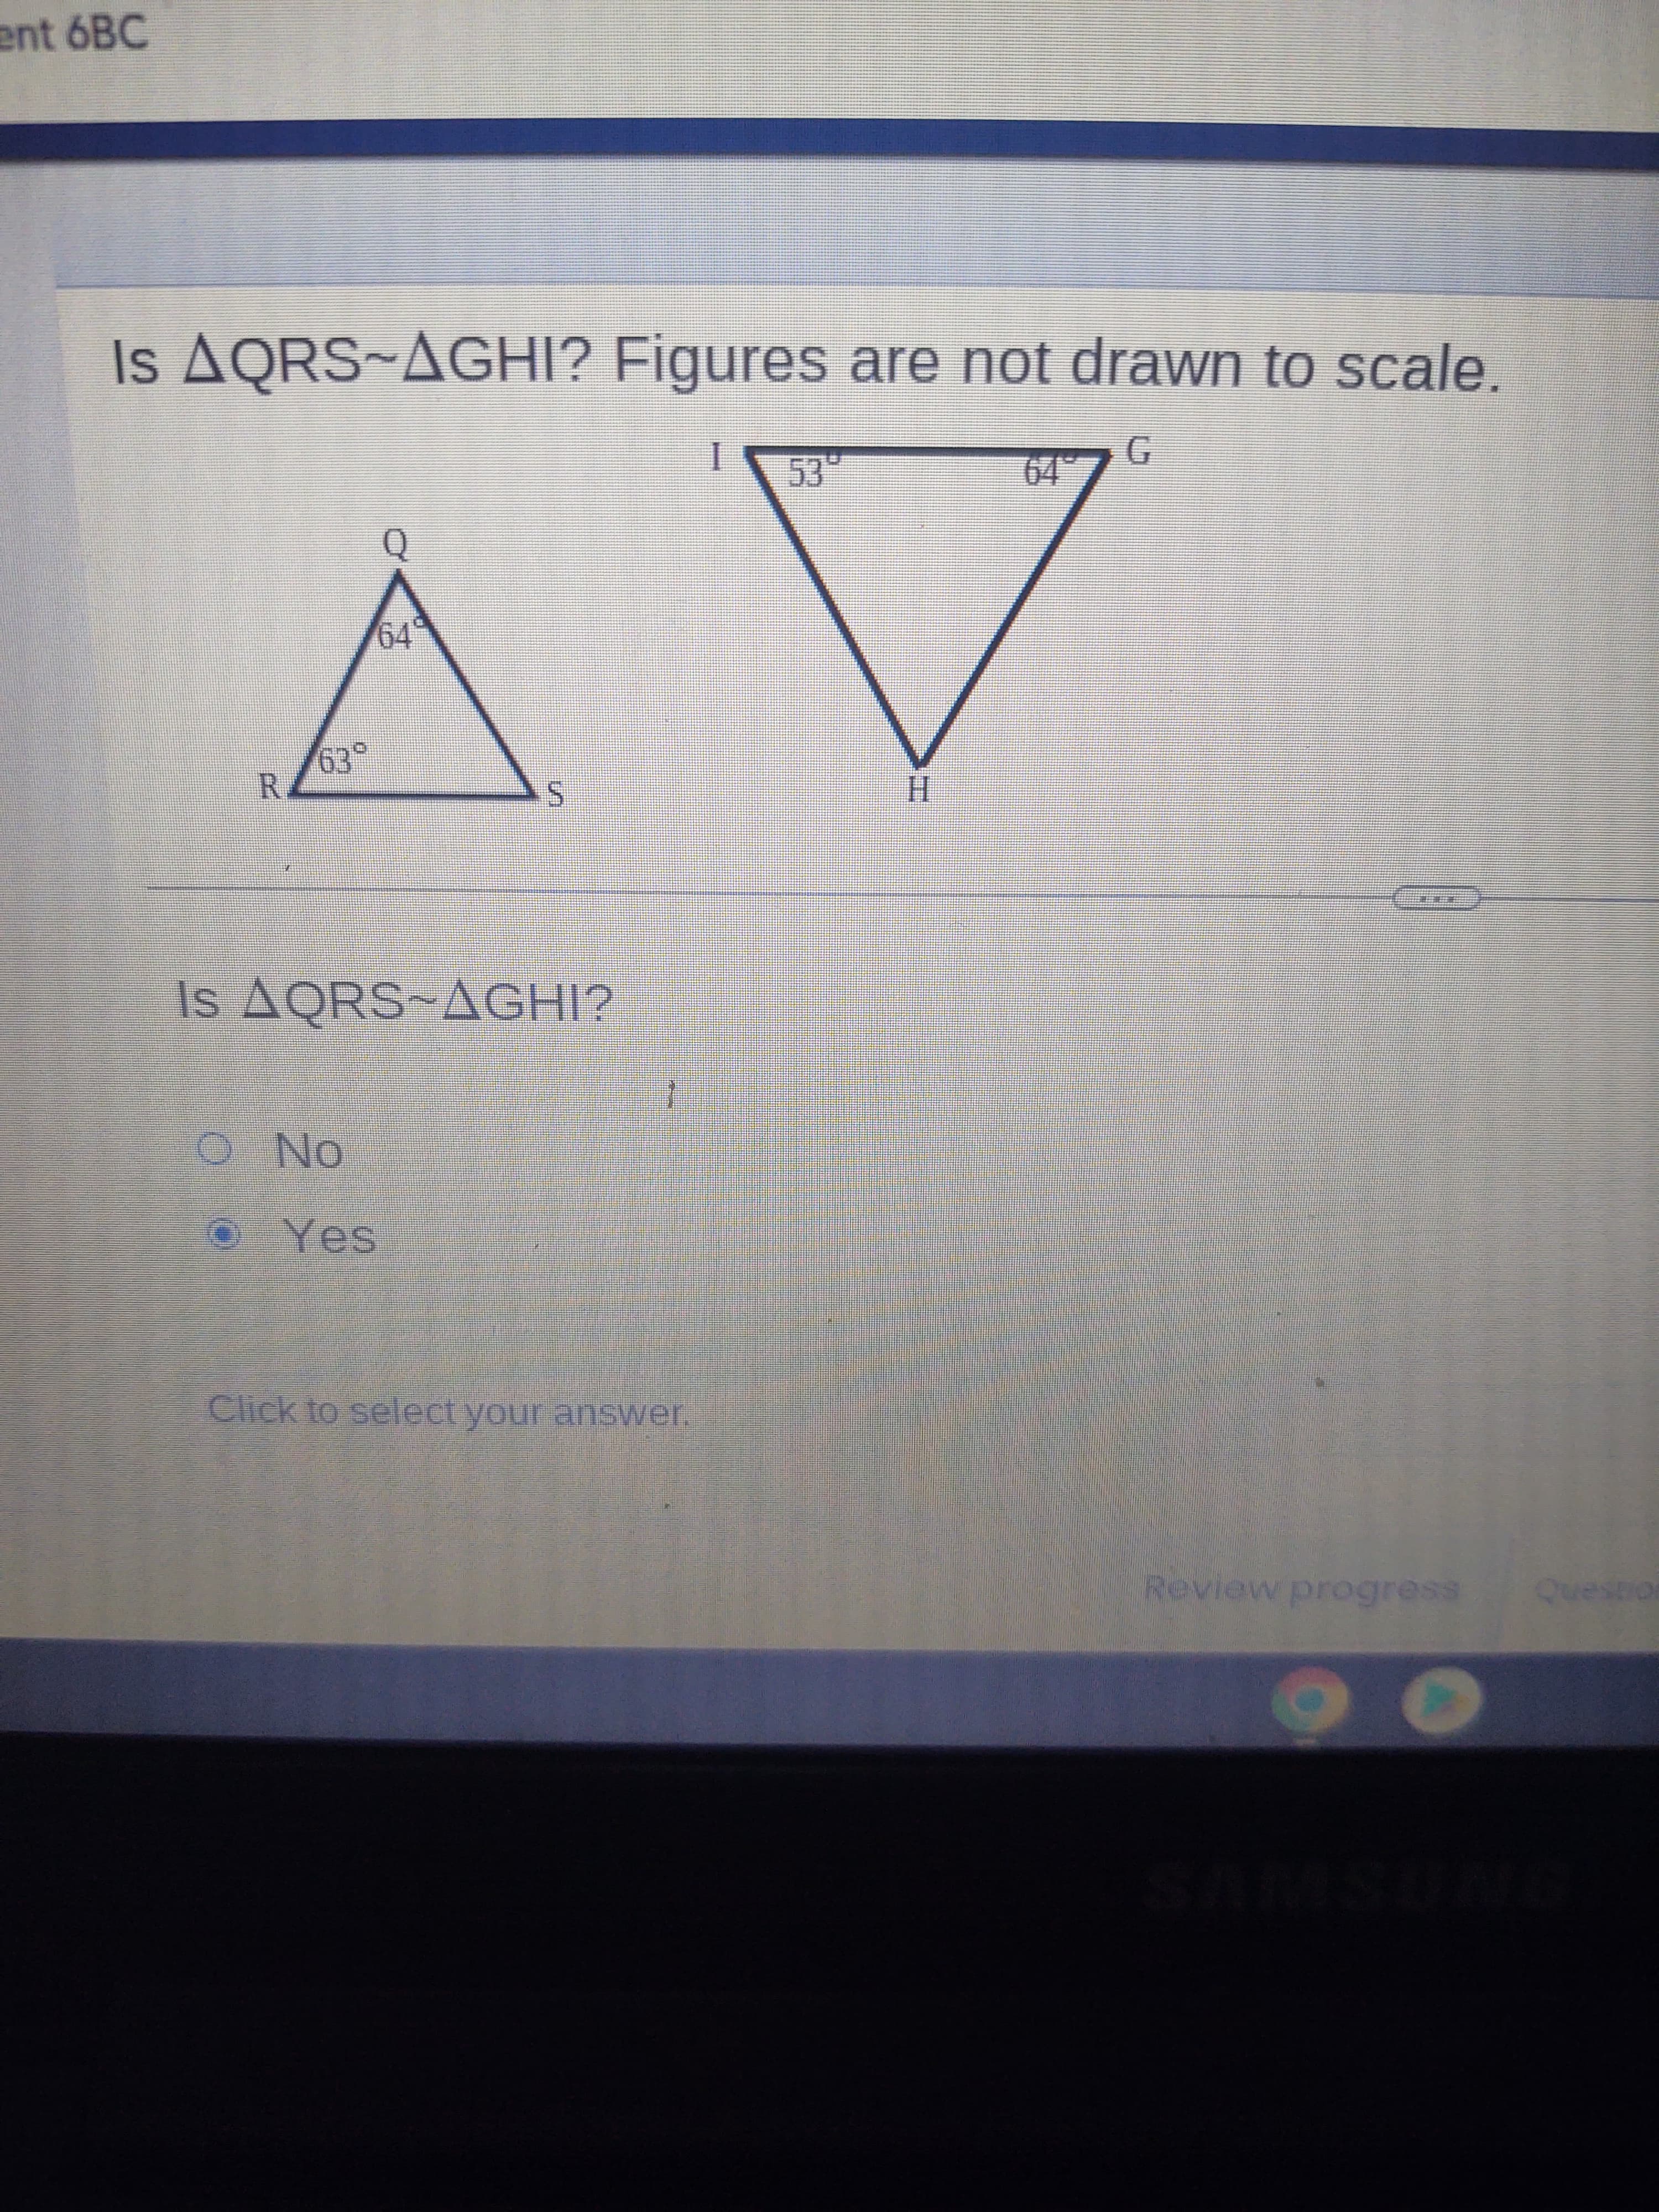 ent 6BC
Is AQRS~AGHI? Figures are not drawn to scale.
C.
R.
H.
Is AQRS~AGHI?
ON O
Click to select your answer.
Review progress
onsand
